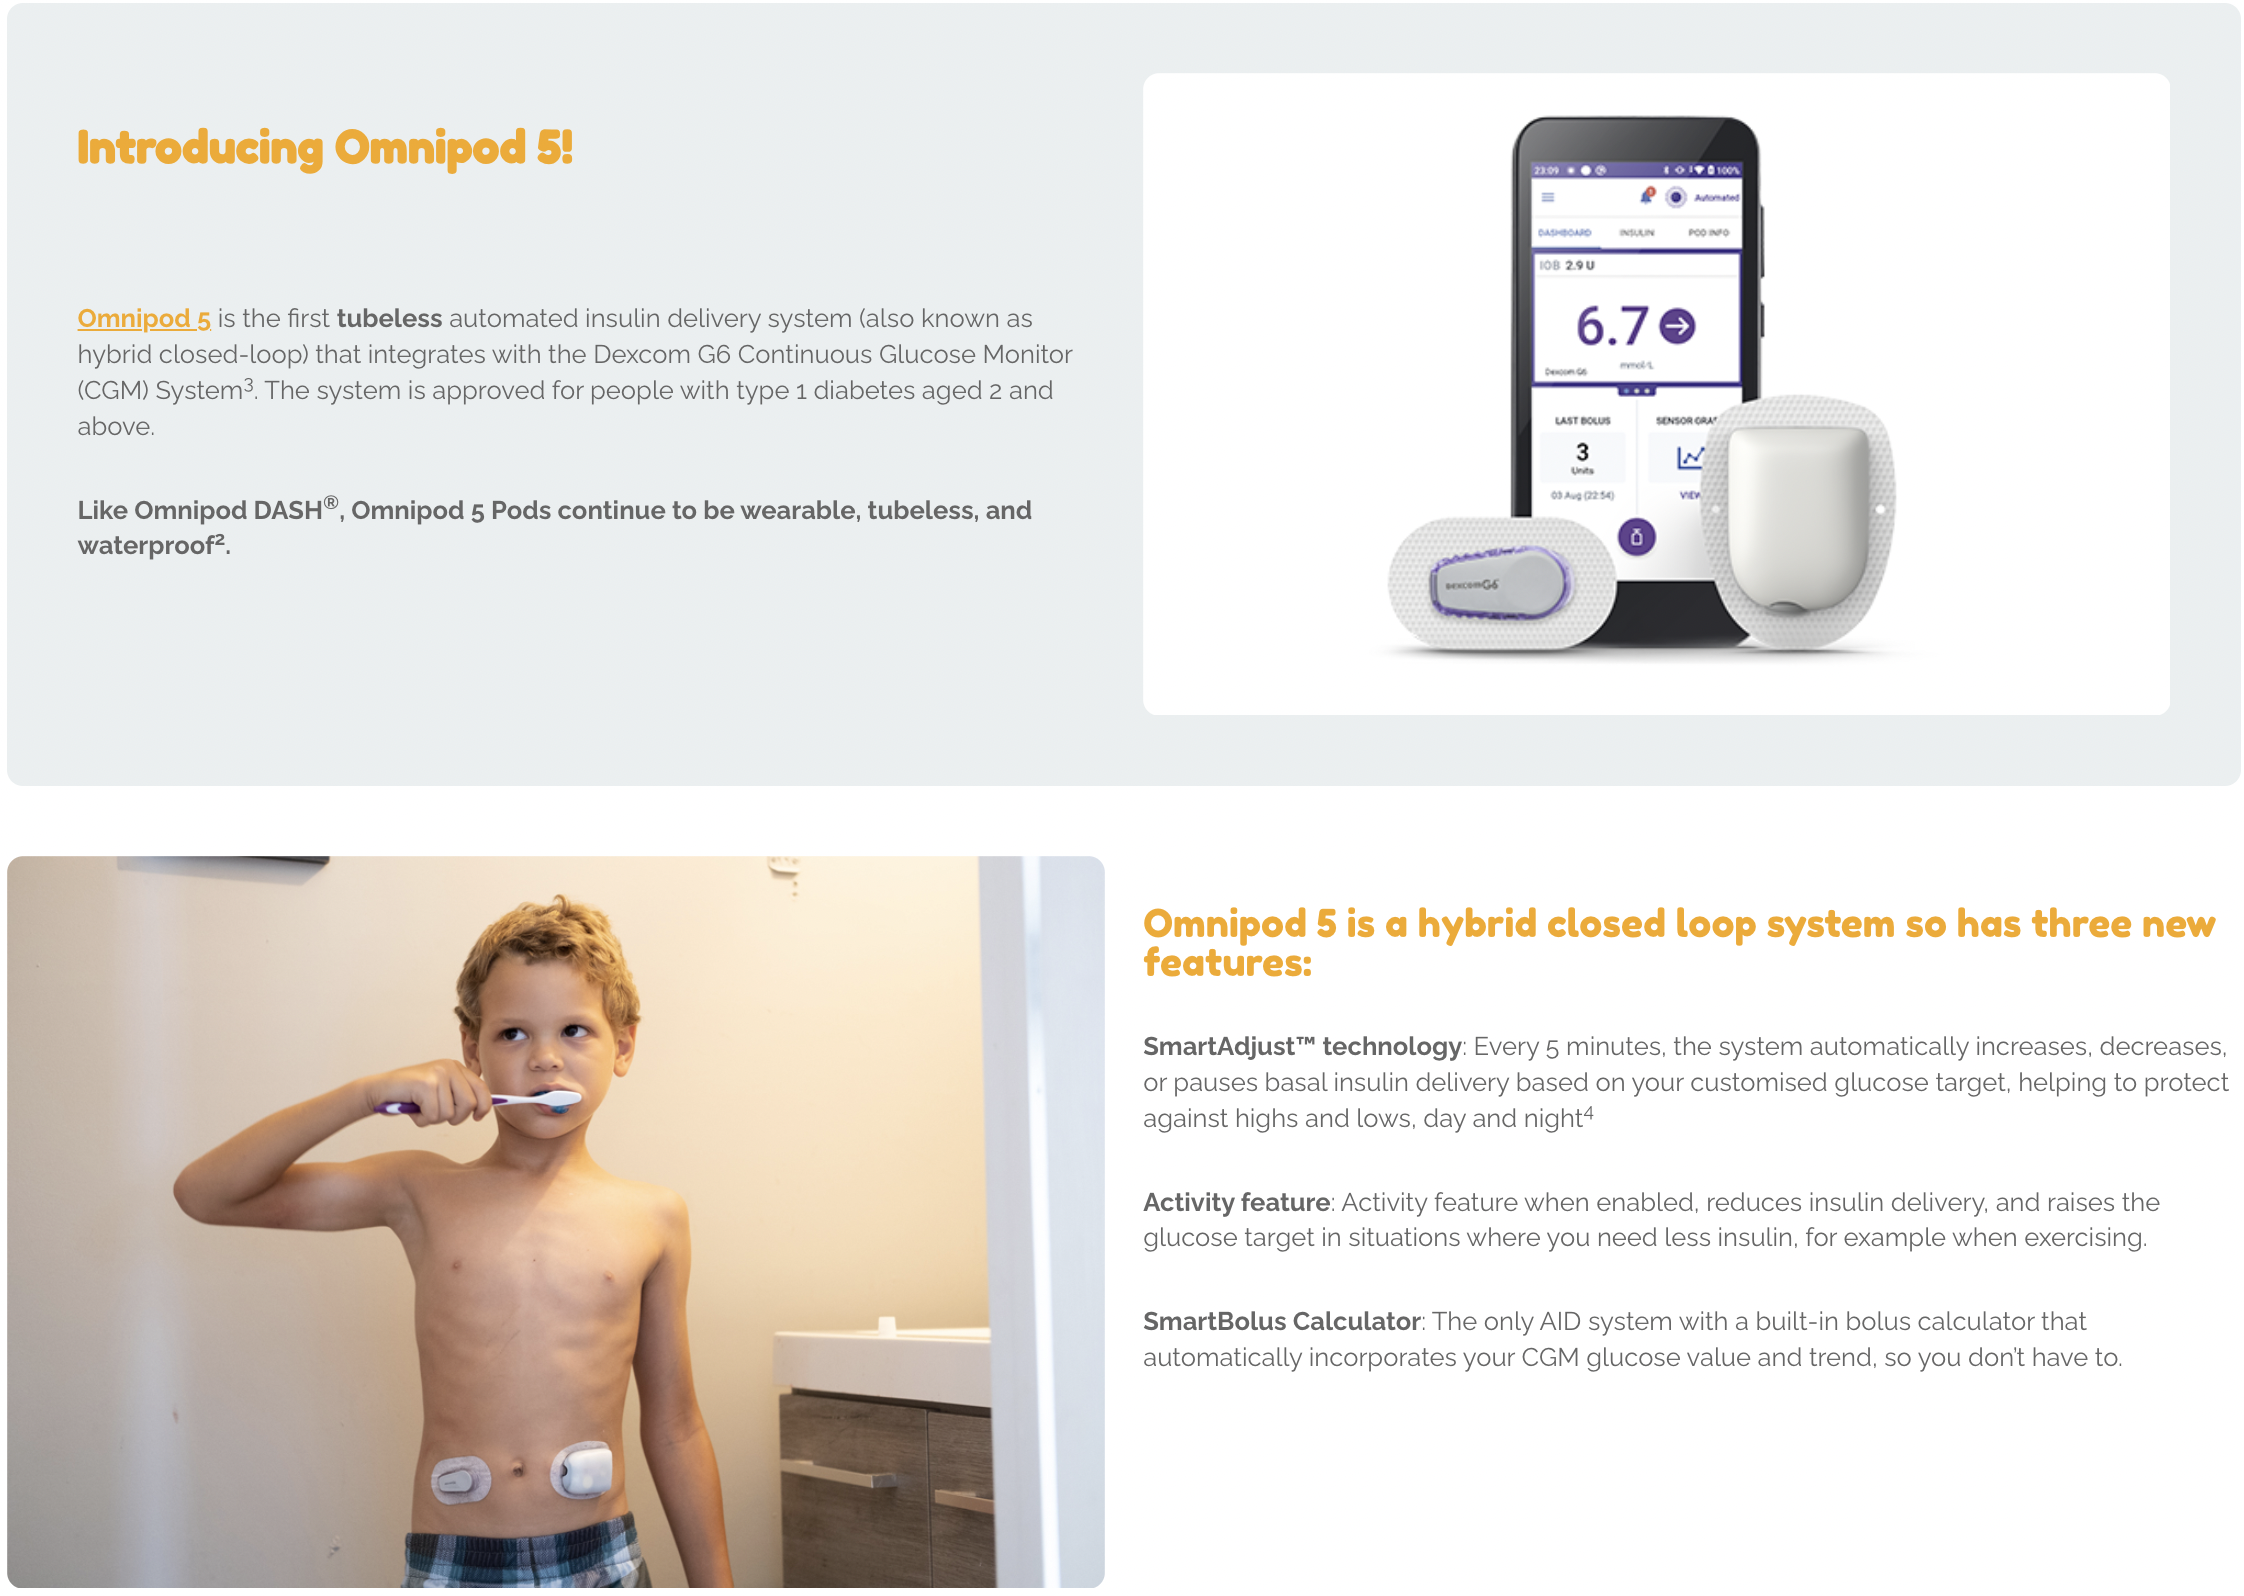 Omnipod 5 system is now commercially available in the UK